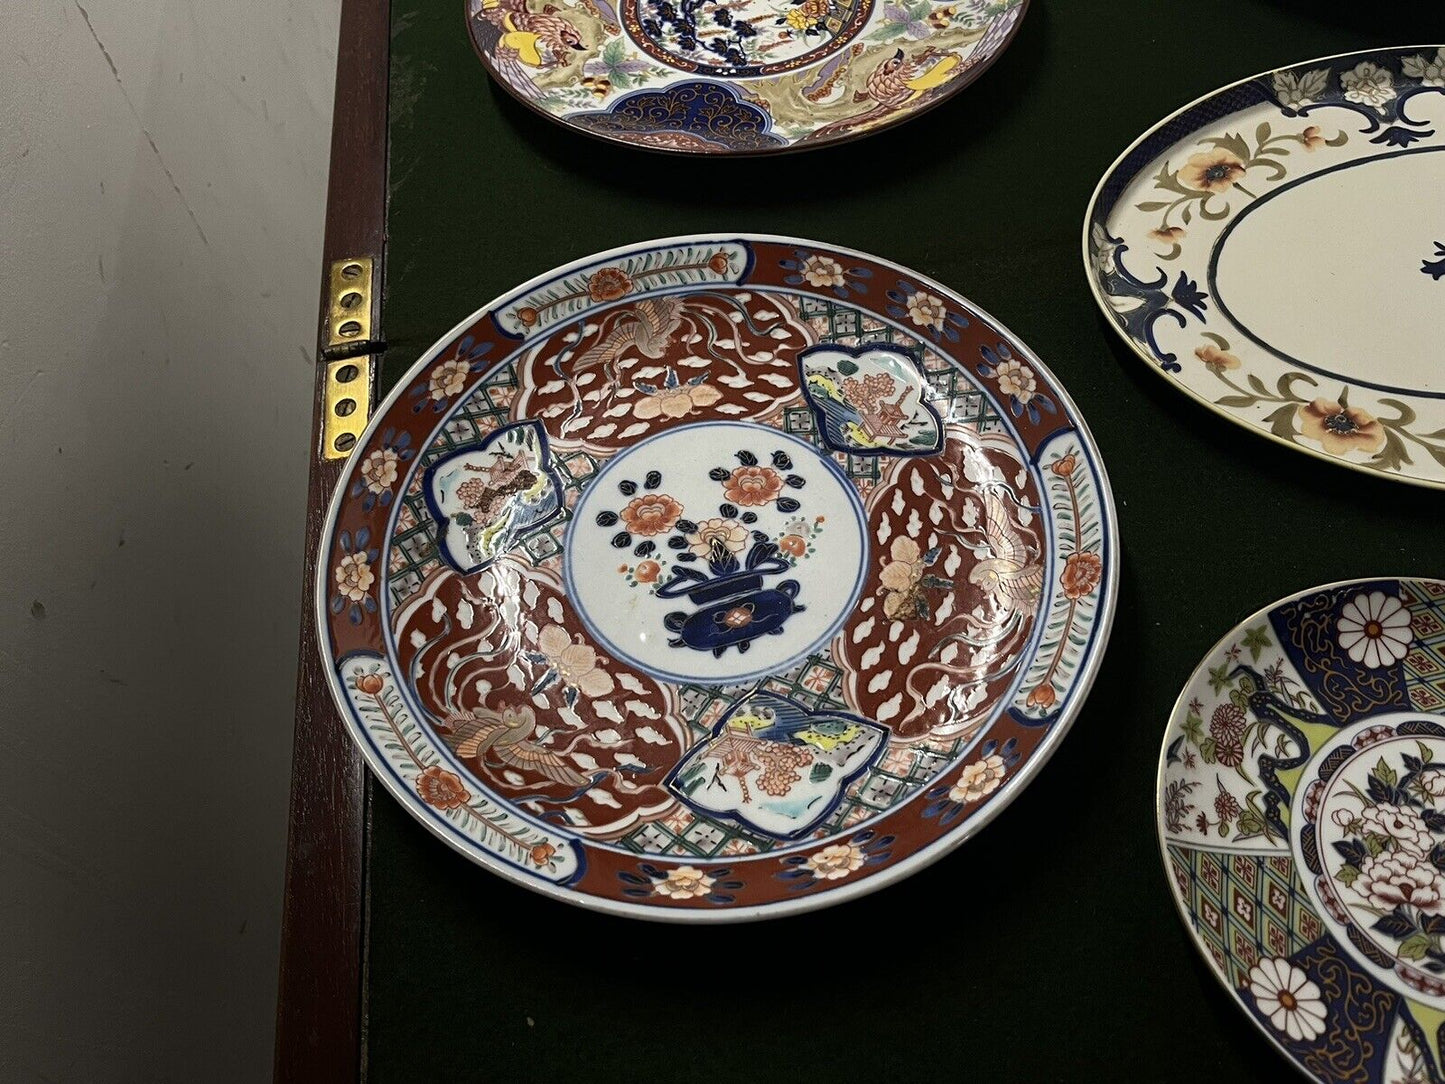 Japanese Plates. Collection of 6. We Ship Worldwide.